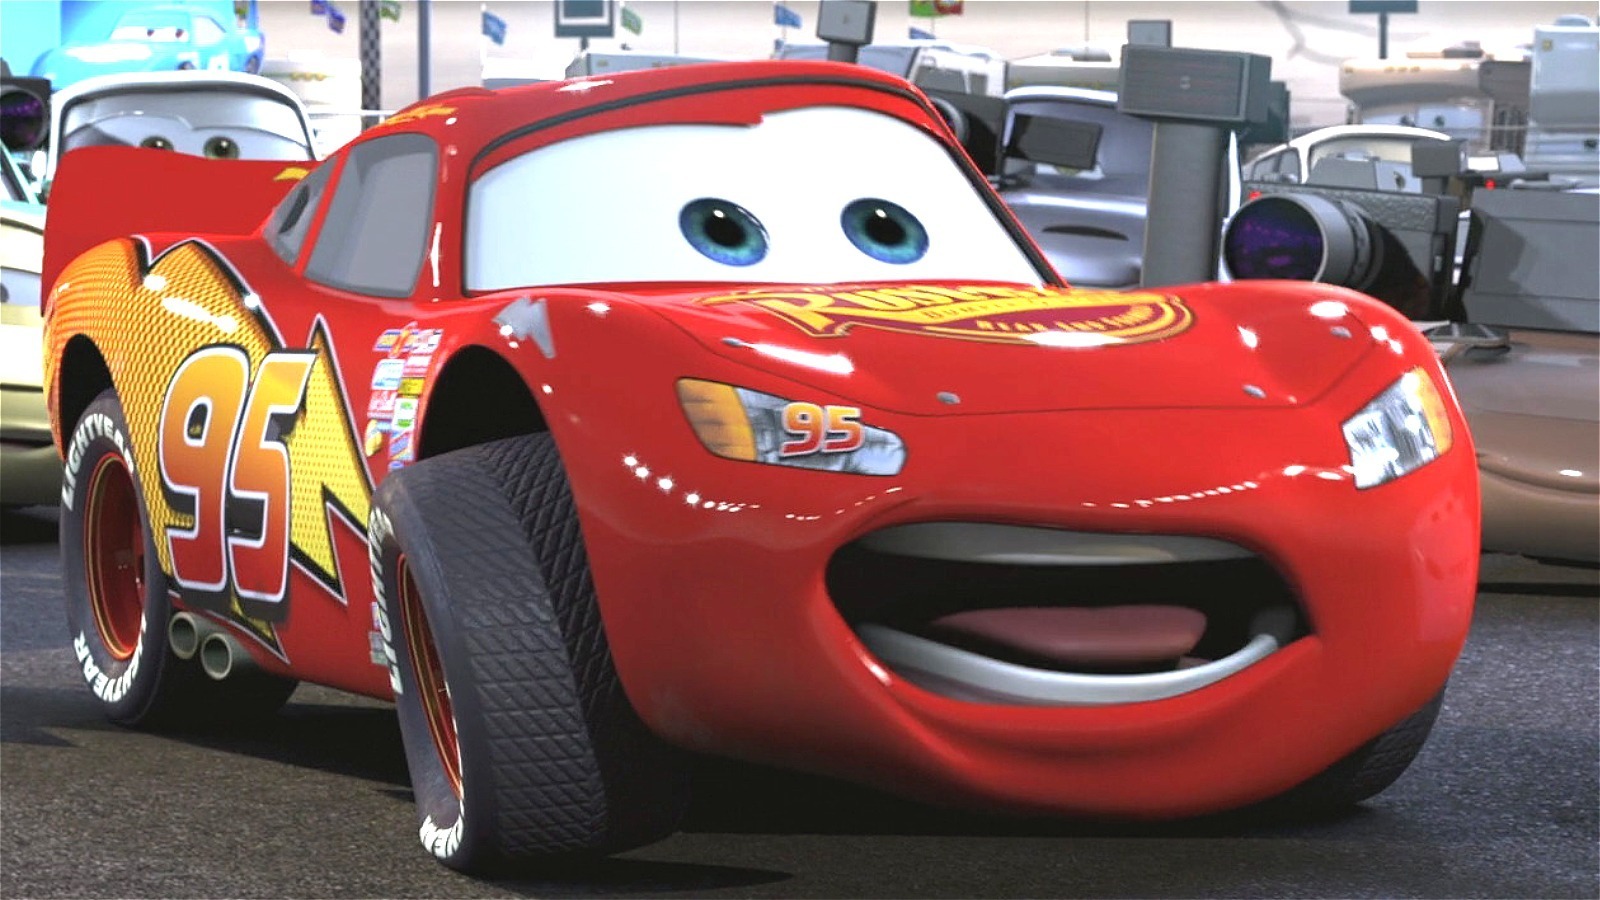 Lightning McQueen And Mater Return In The Disney+ Series Cars On